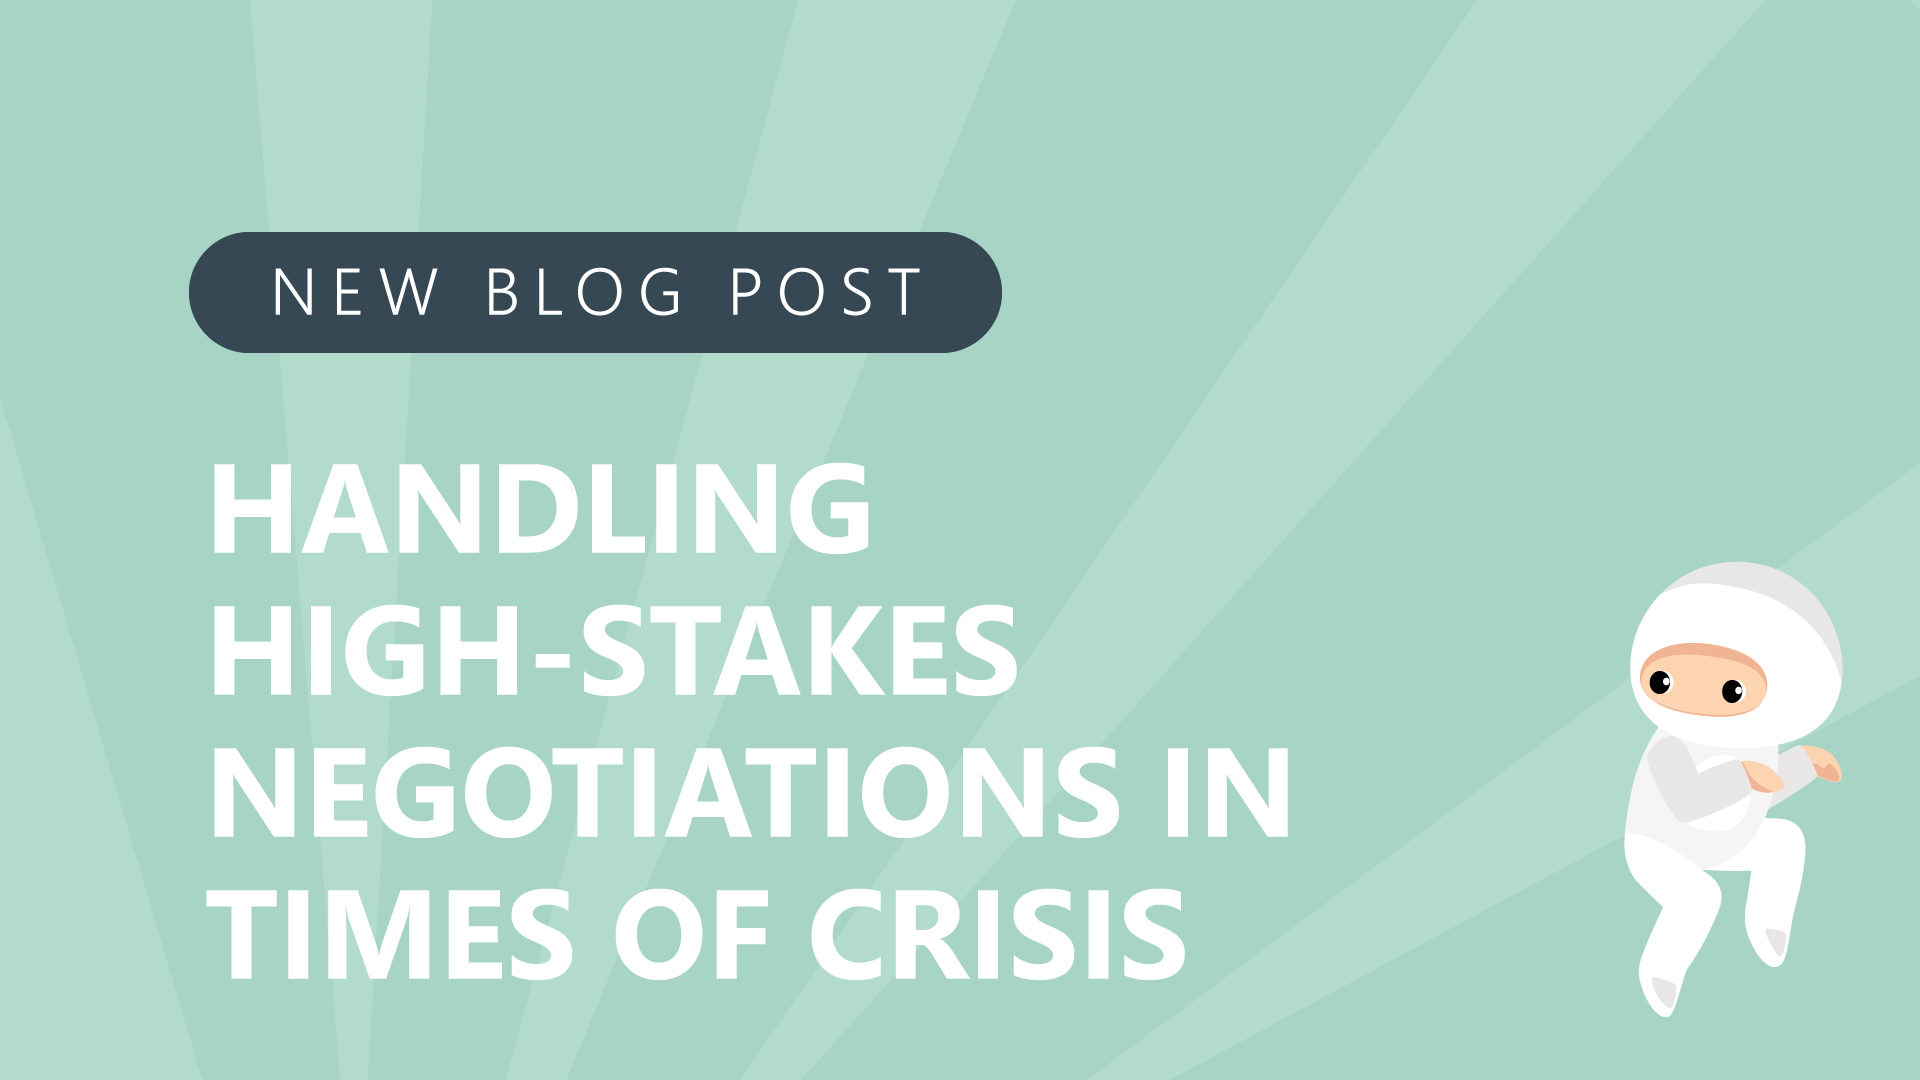 76-Handling-High-Stakes-Negotiations-in-Times-of-Crisis.jpg